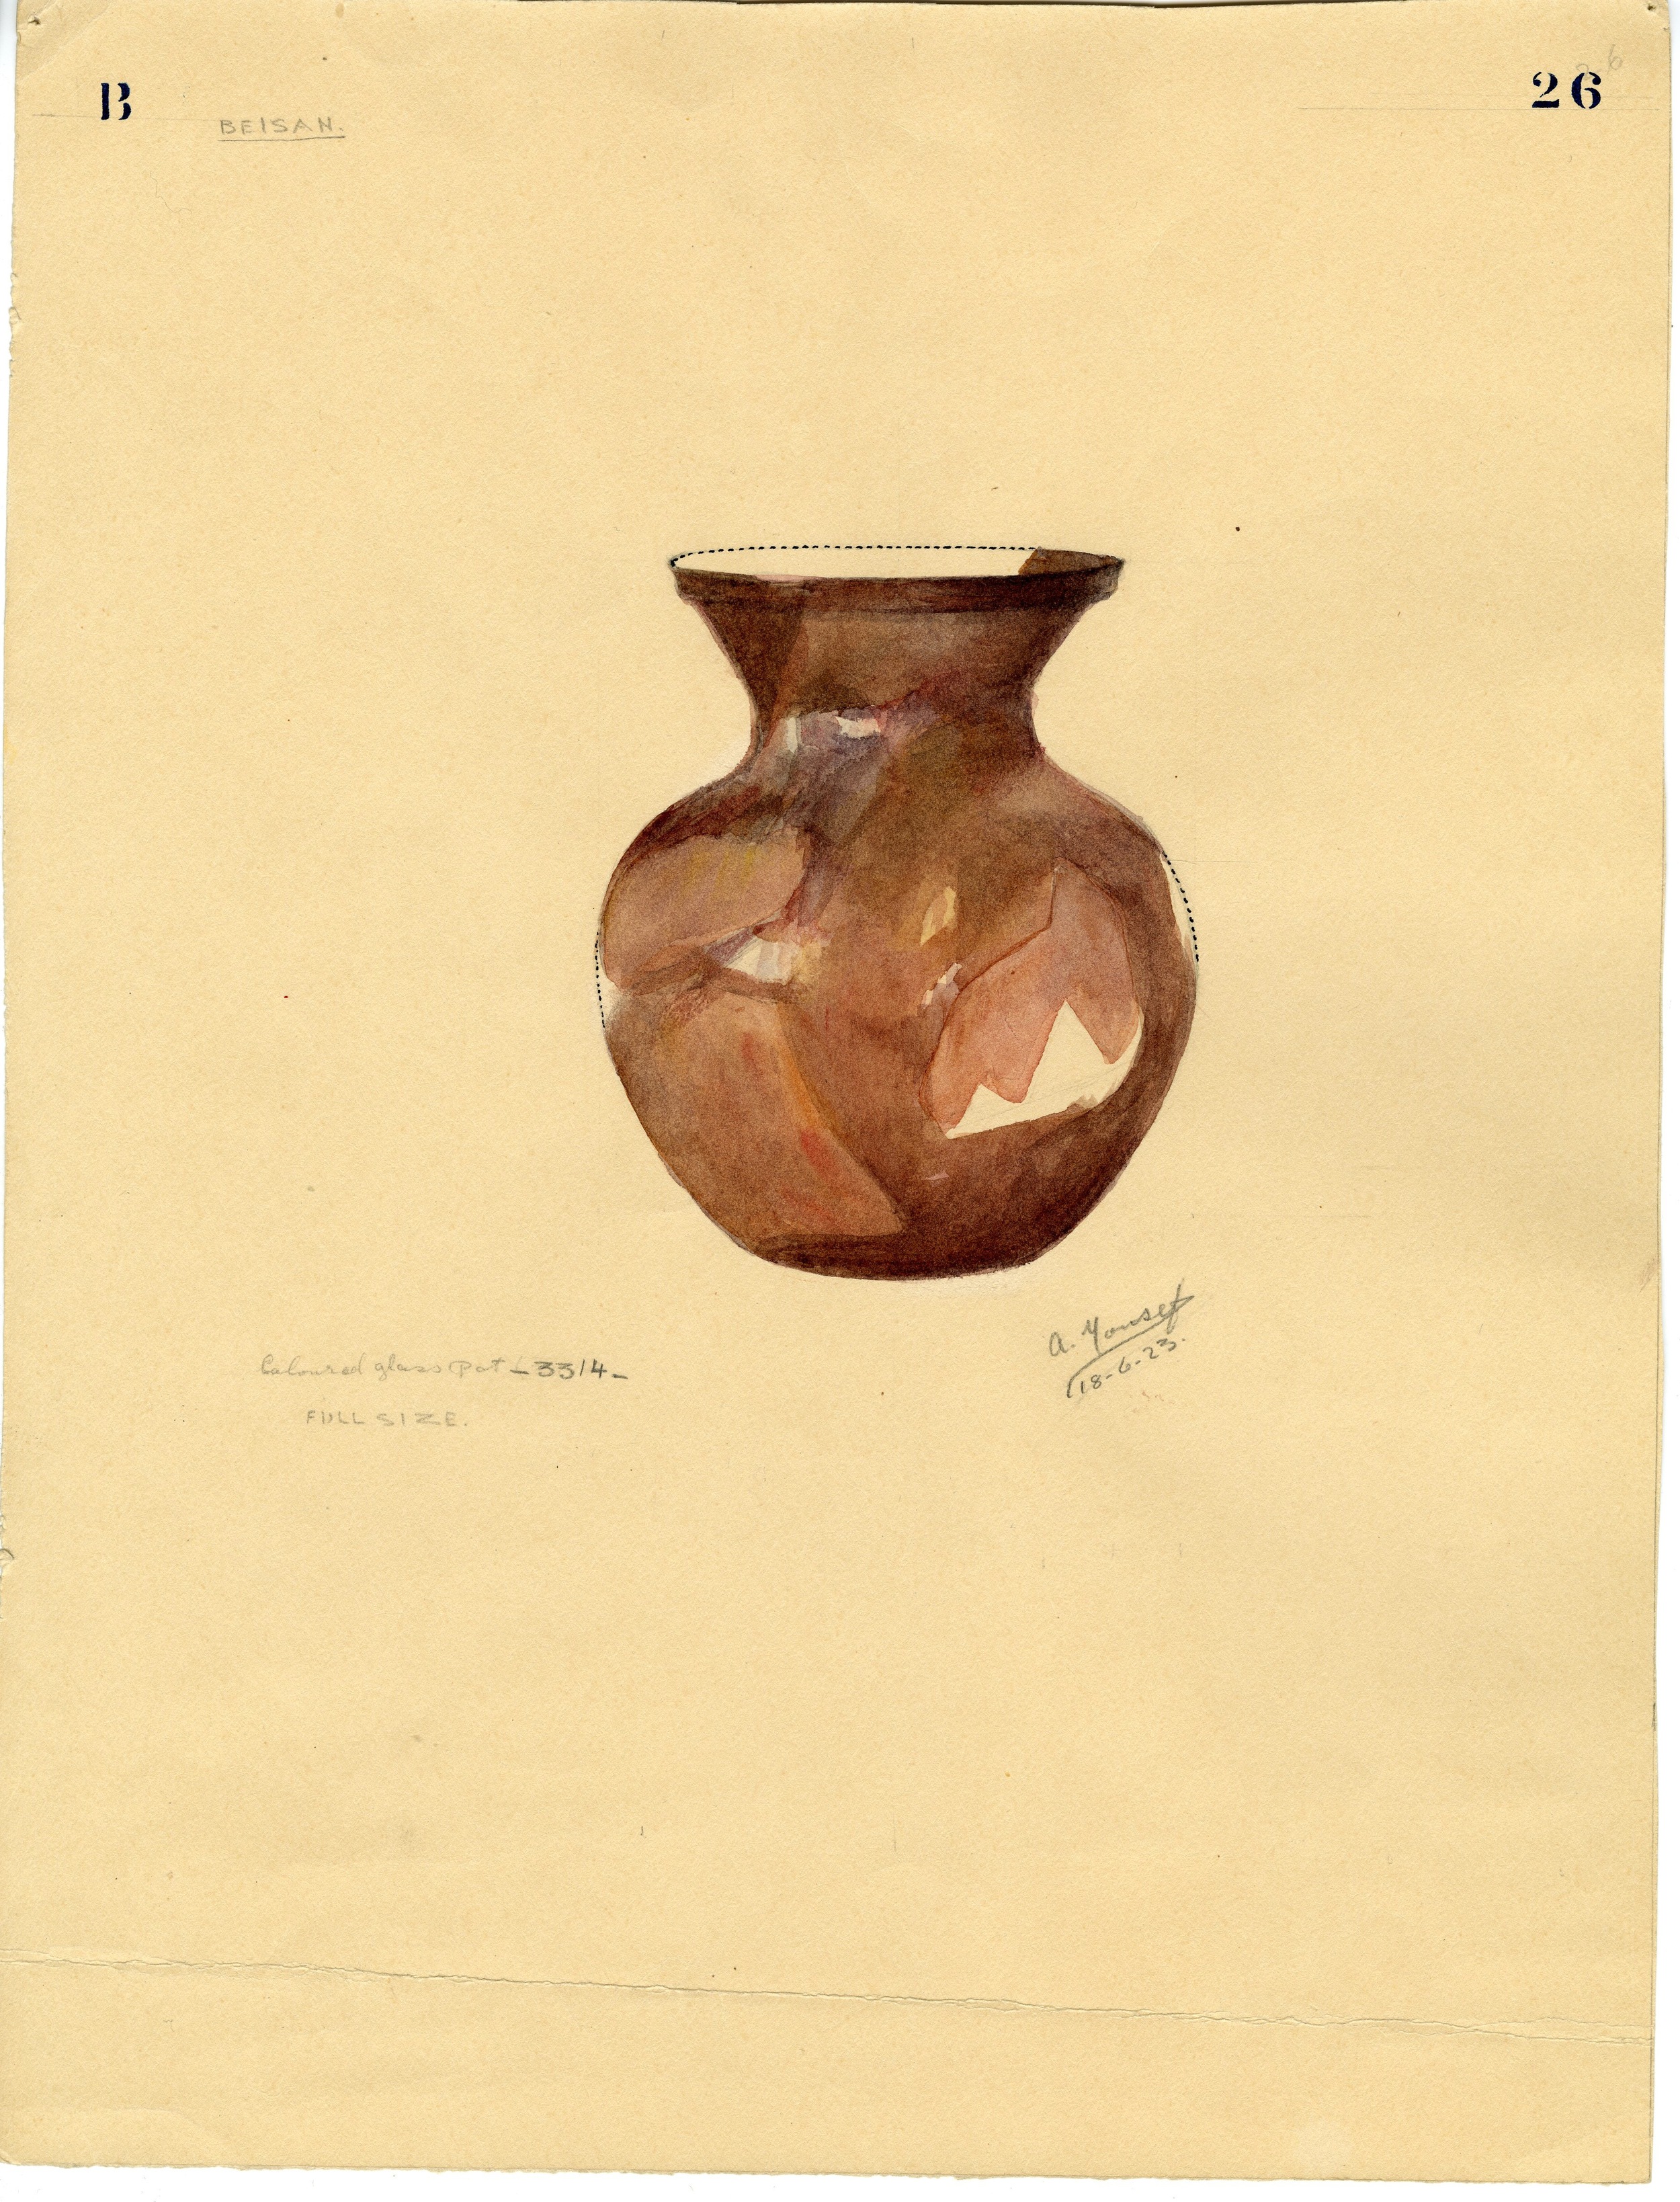 Watercolor of glass pot # 3314, from the Fisher excavations.